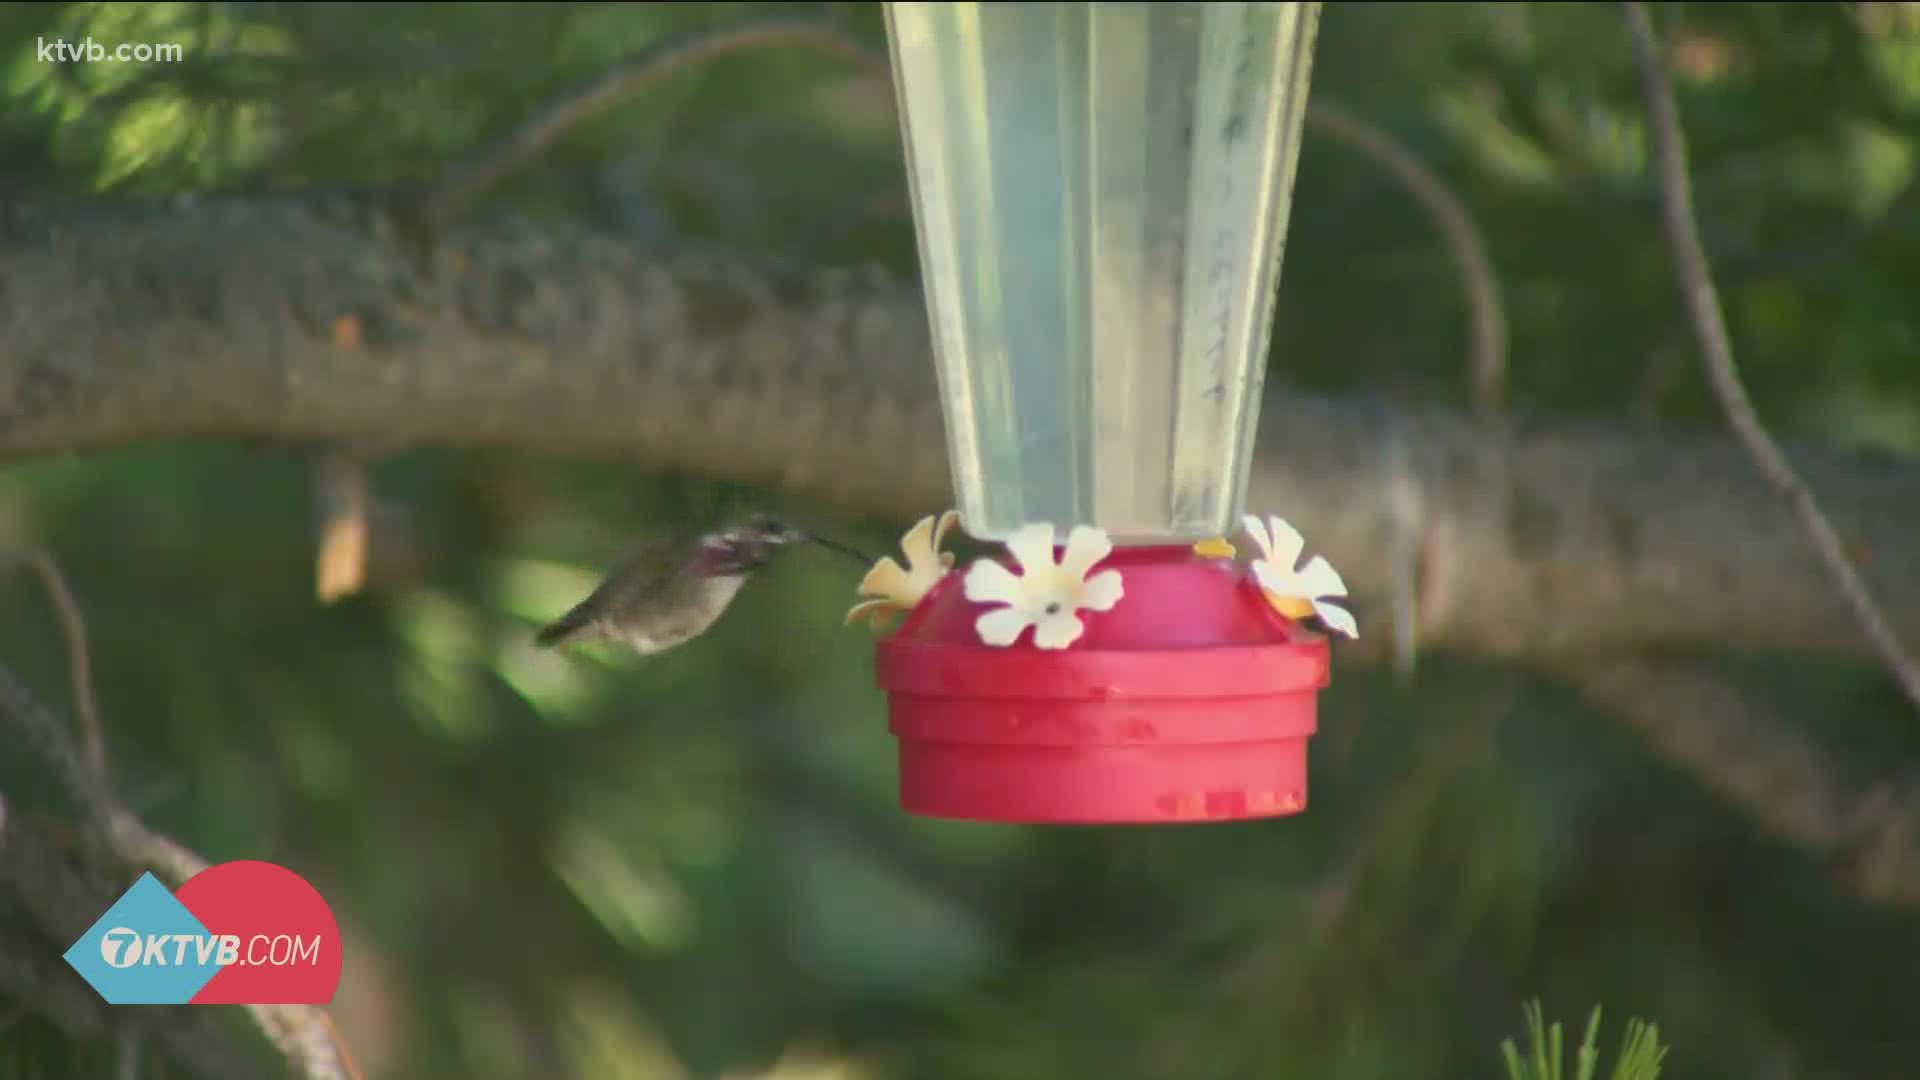 Nestled in the hills south of Twin Falls, two friends run a 30-year-old treasure at the Broockman-White Hummingbird Feeding Station.